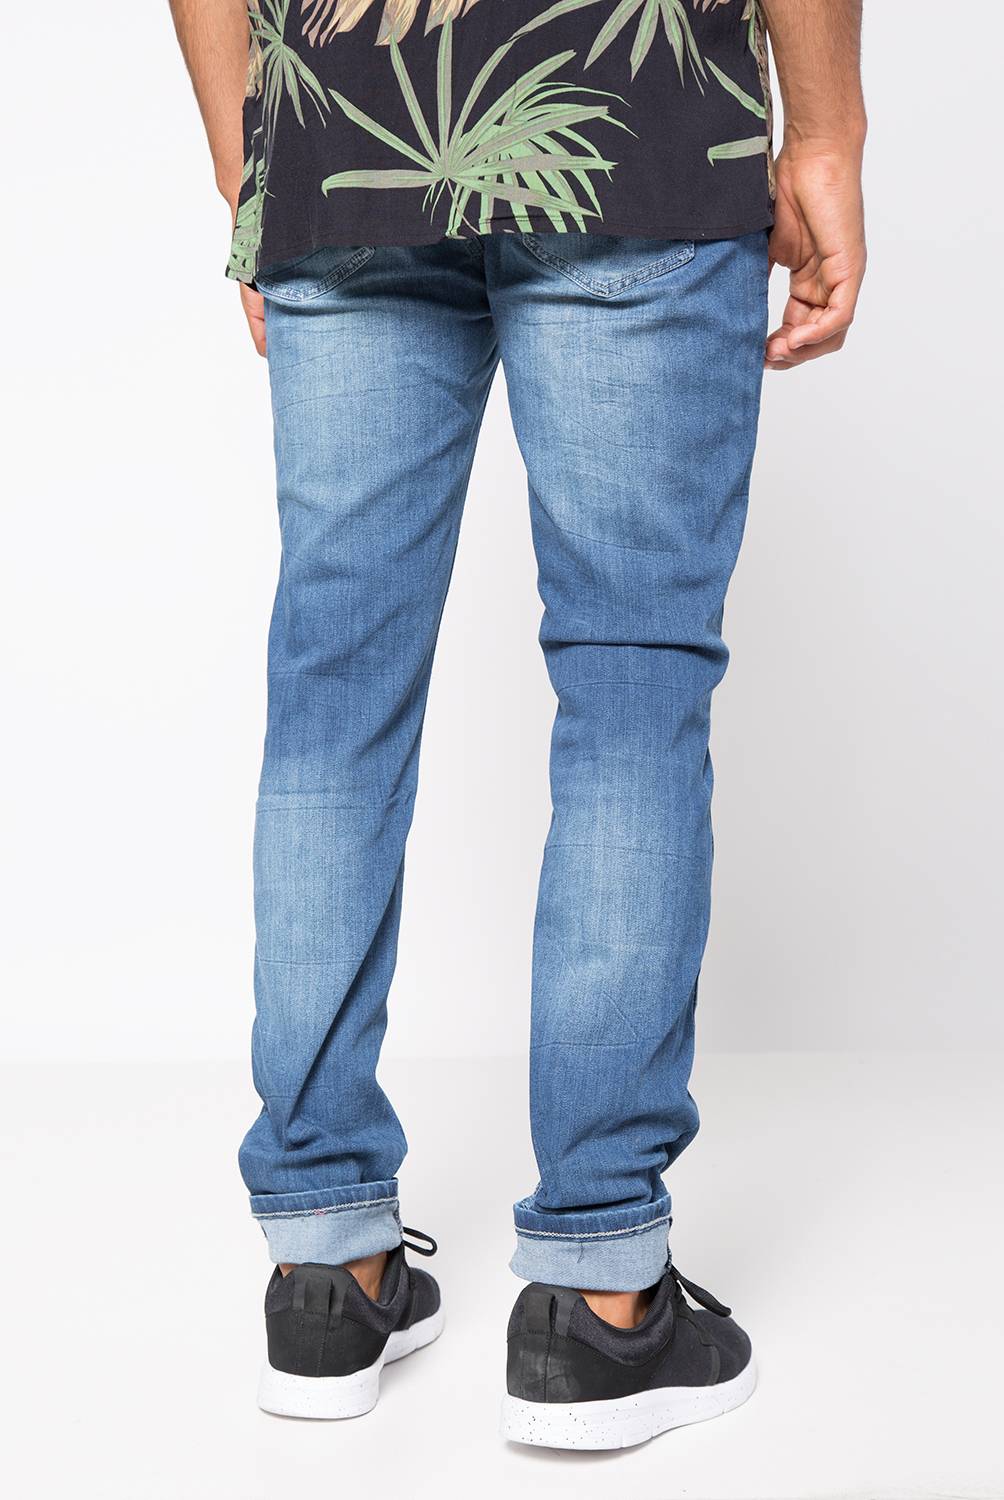 Americanino - Jeans Casual Slim Fit